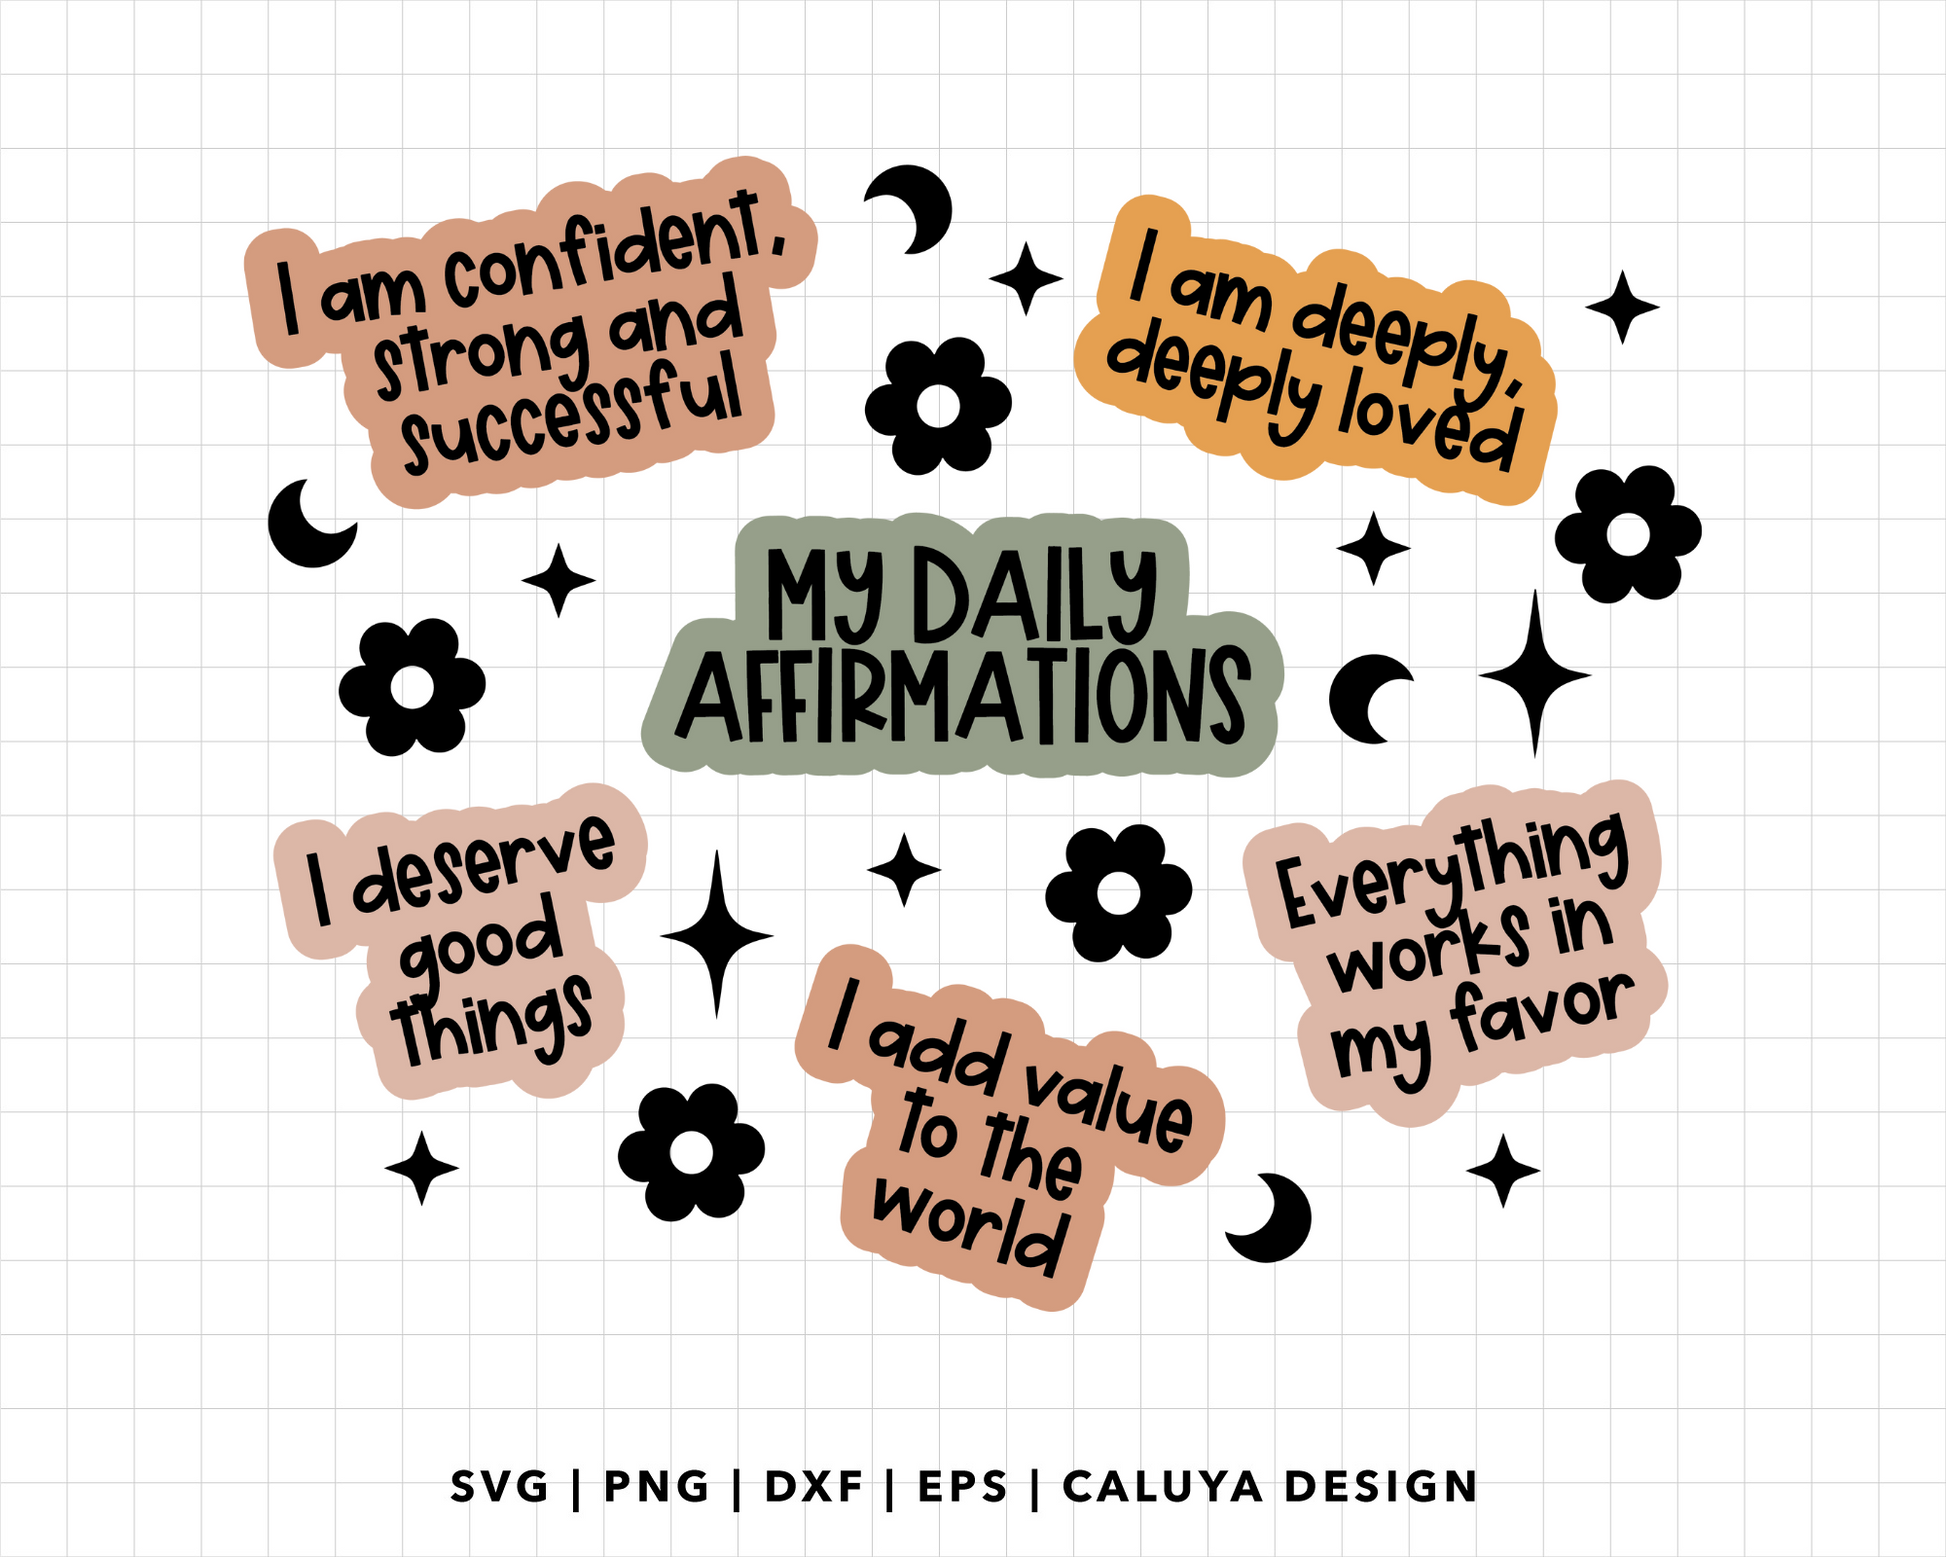 FREE Affirmation SVG | Inspirational Quote SVG Cut File for Cricut, Cameo Silhouette | Free SVG Cut File